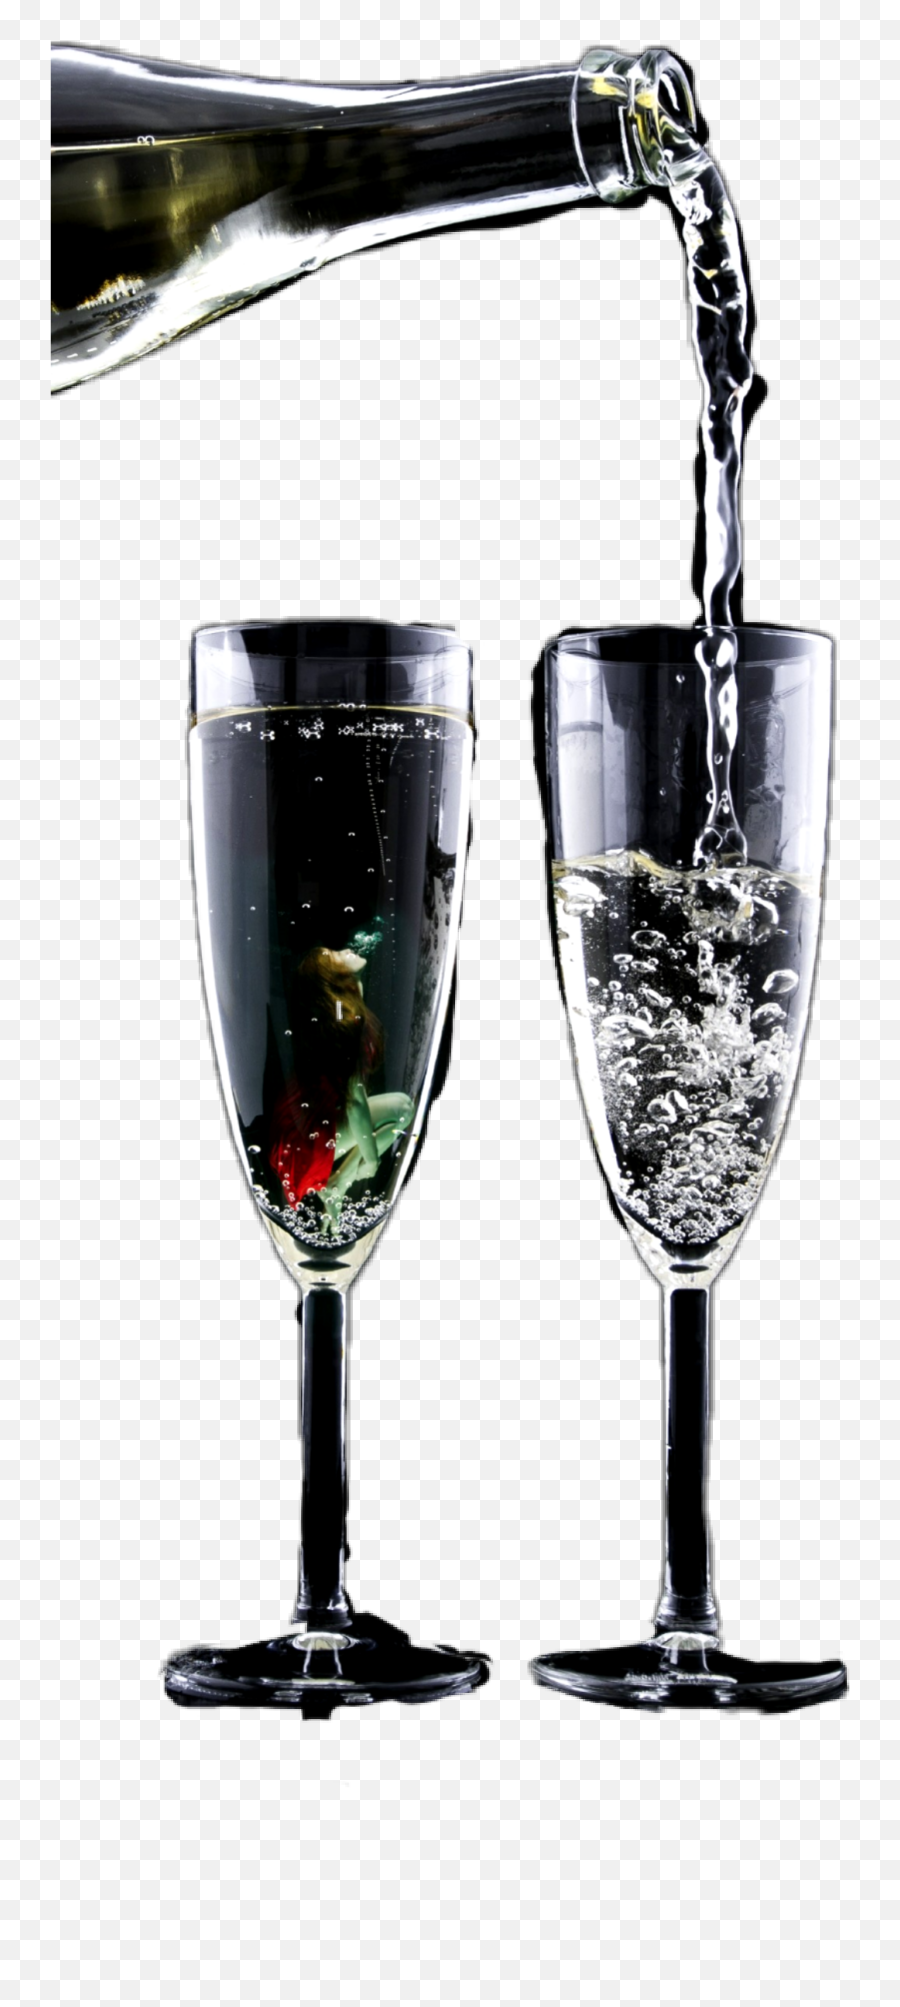 The Most Edited Sparkling Wine Picsart - Champagne Glass Emoji,Champagne Glass Emoji